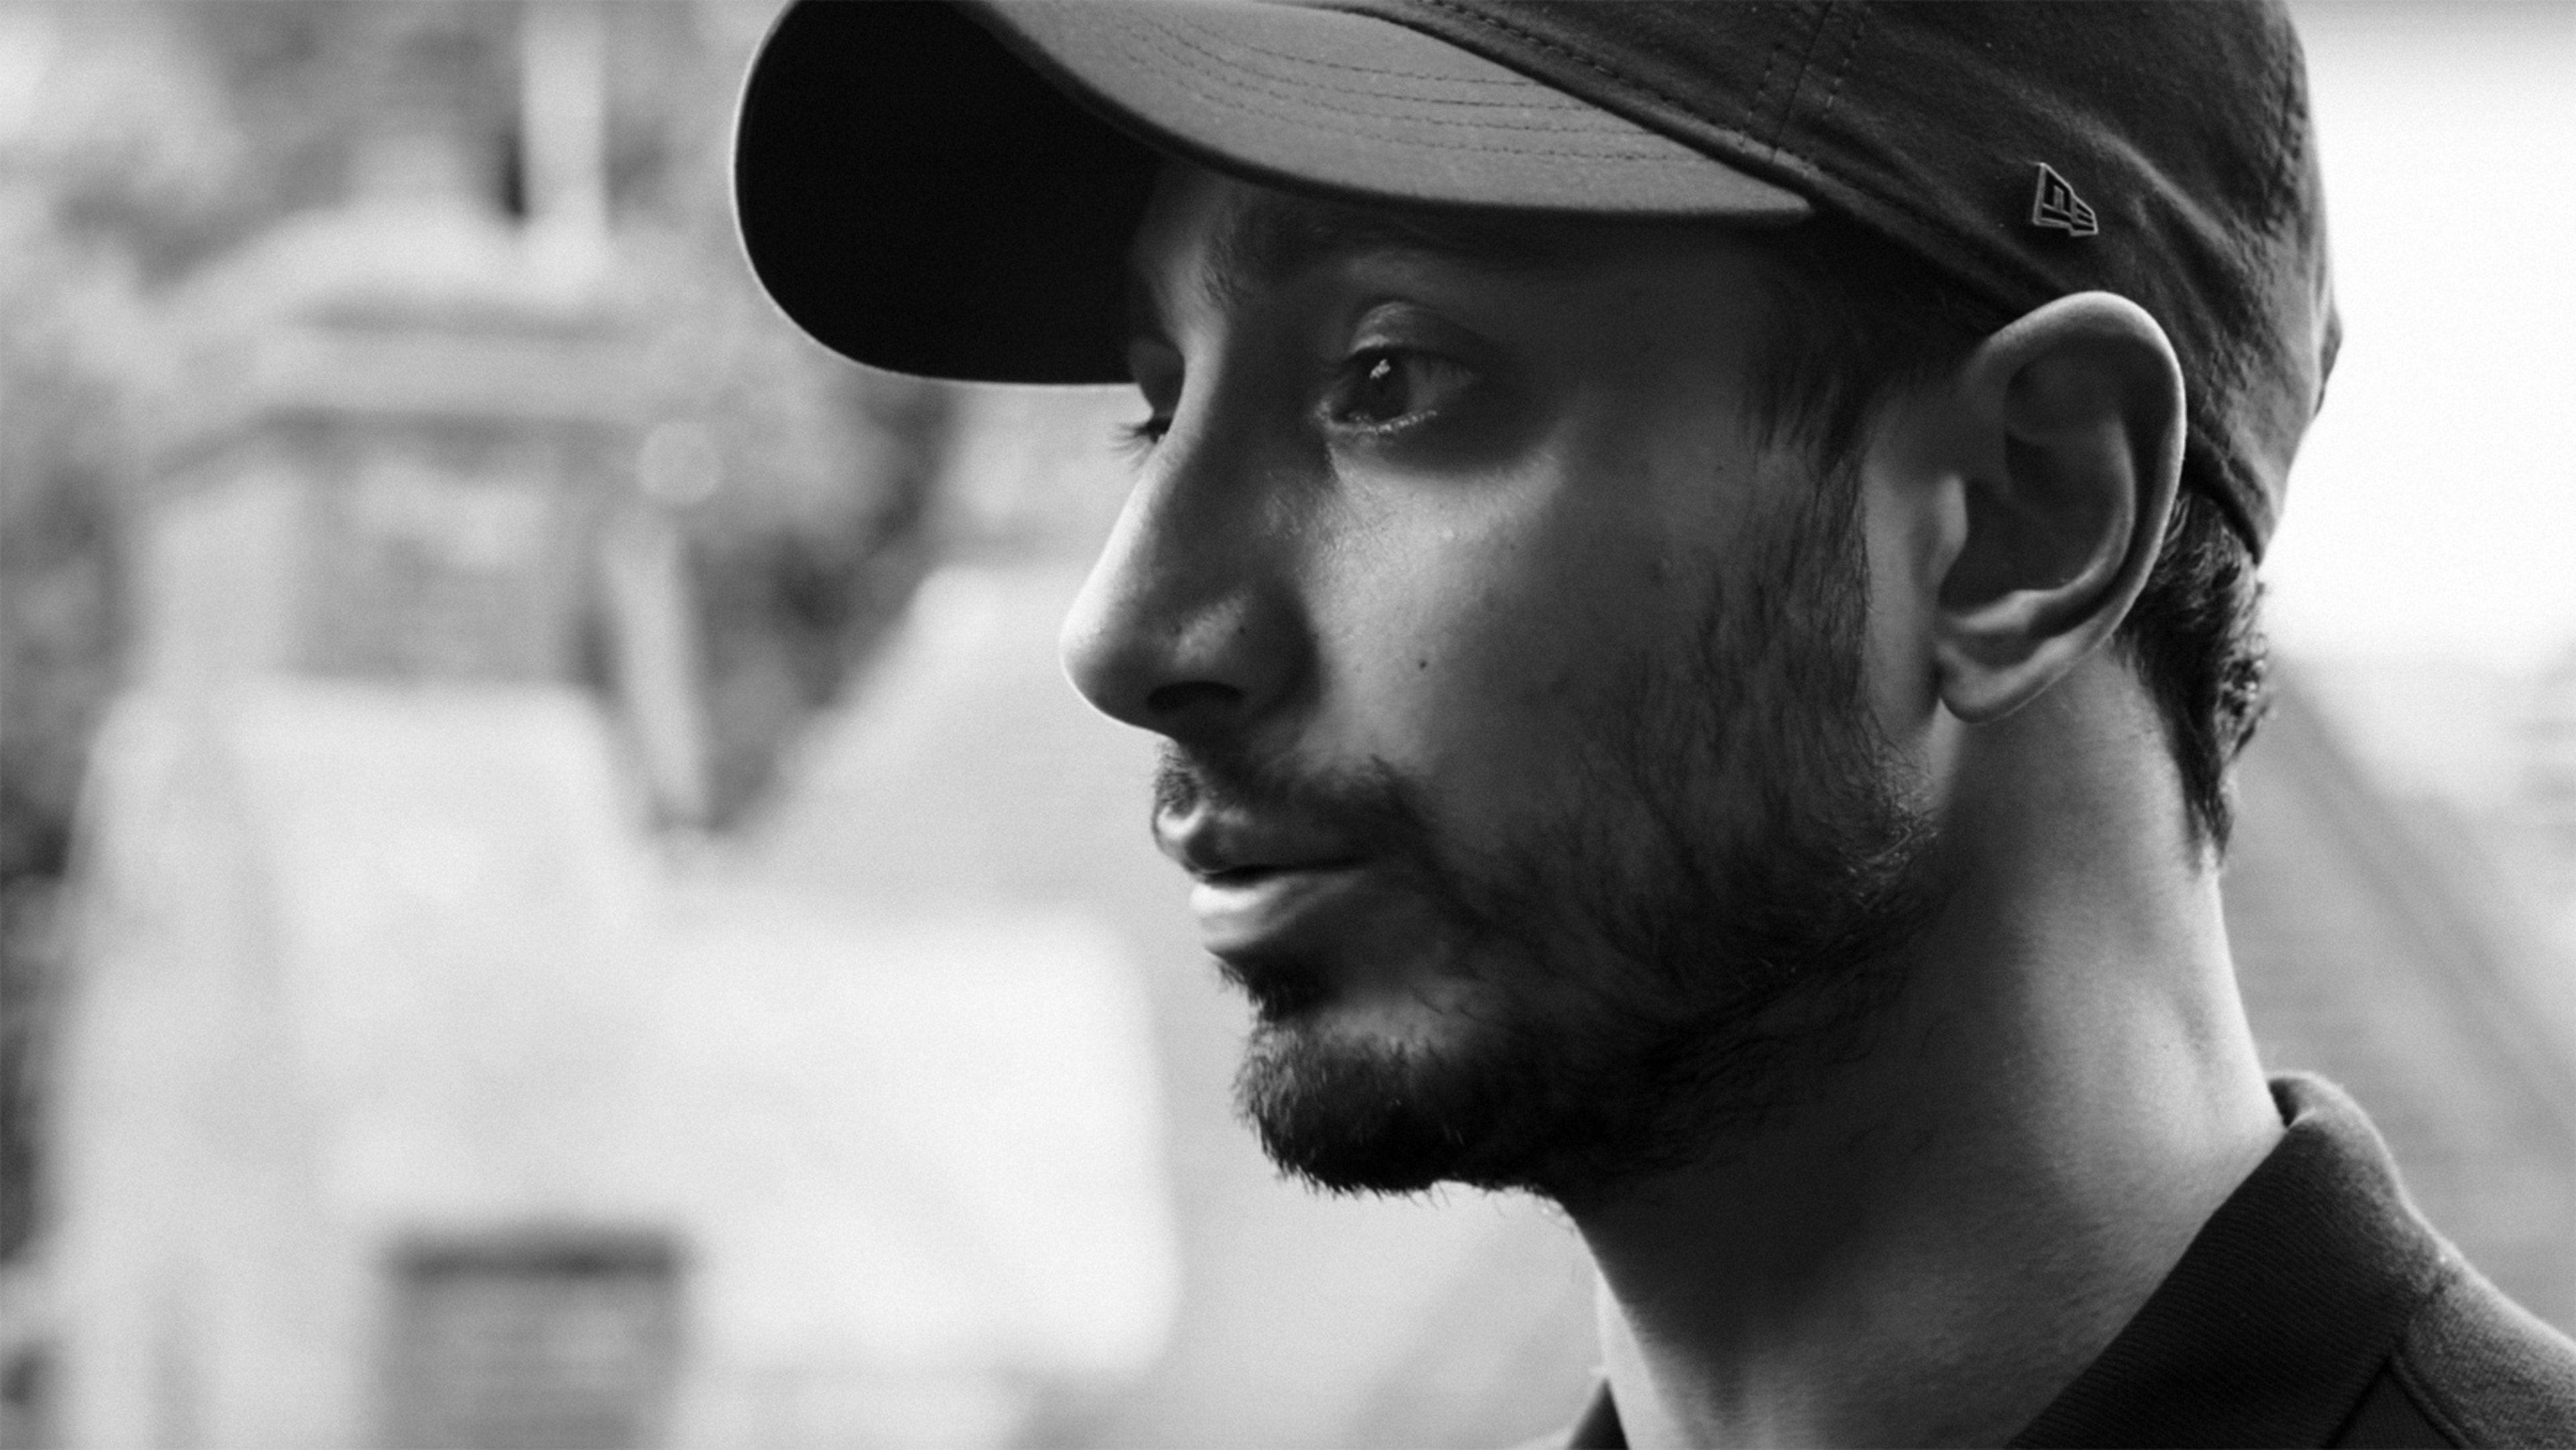 Riz Ahmed Is Starring In This U.K. Political Ad Because “Blacks Don’t Vote”